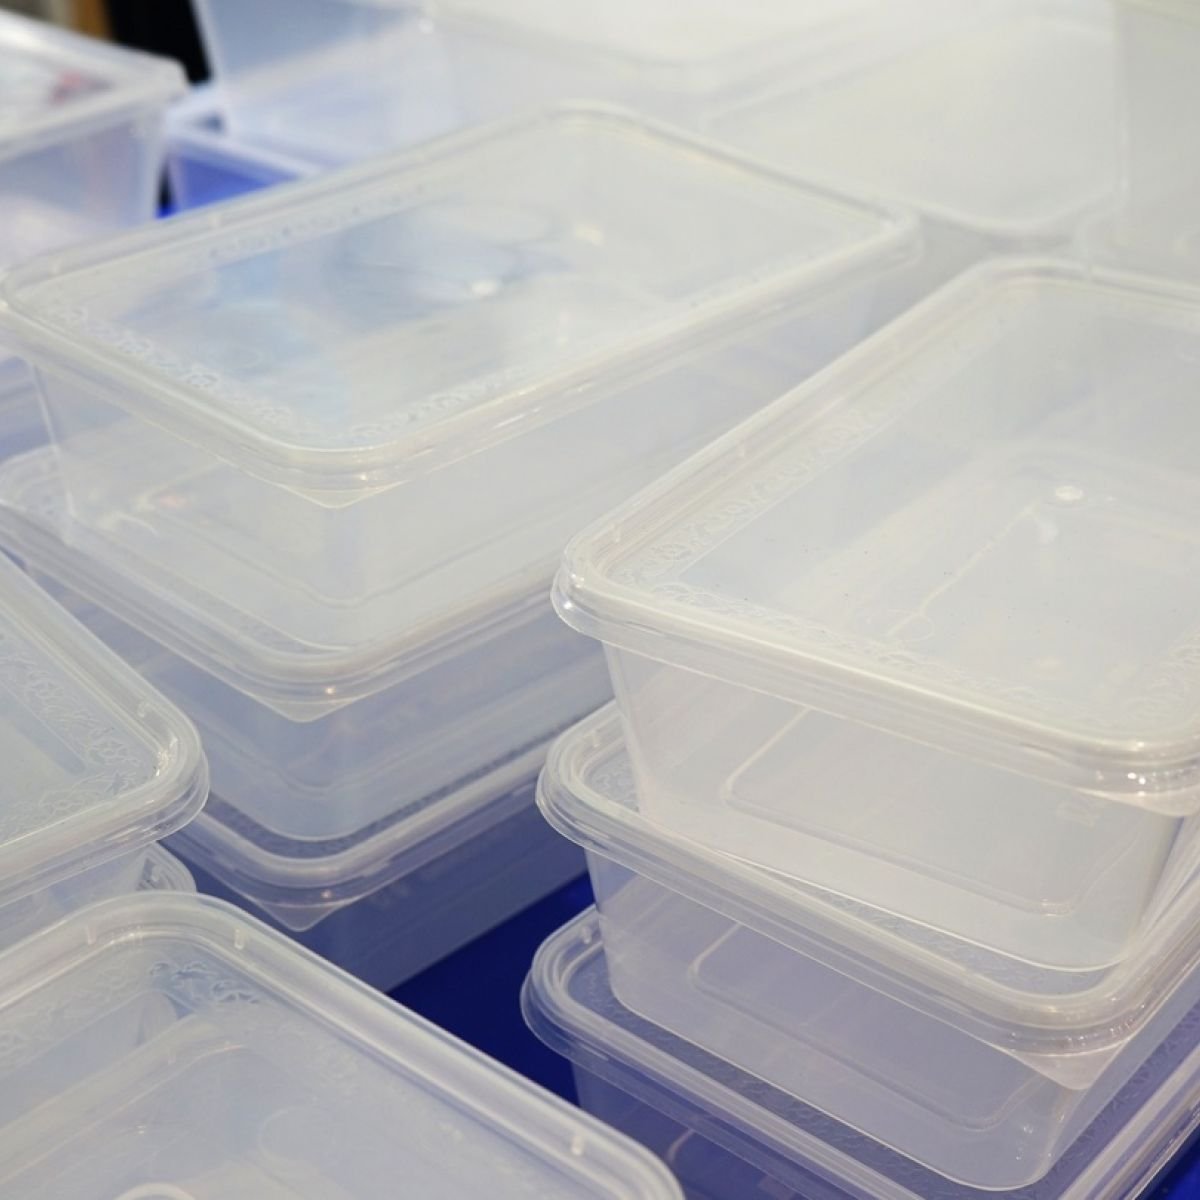 takeaway containers